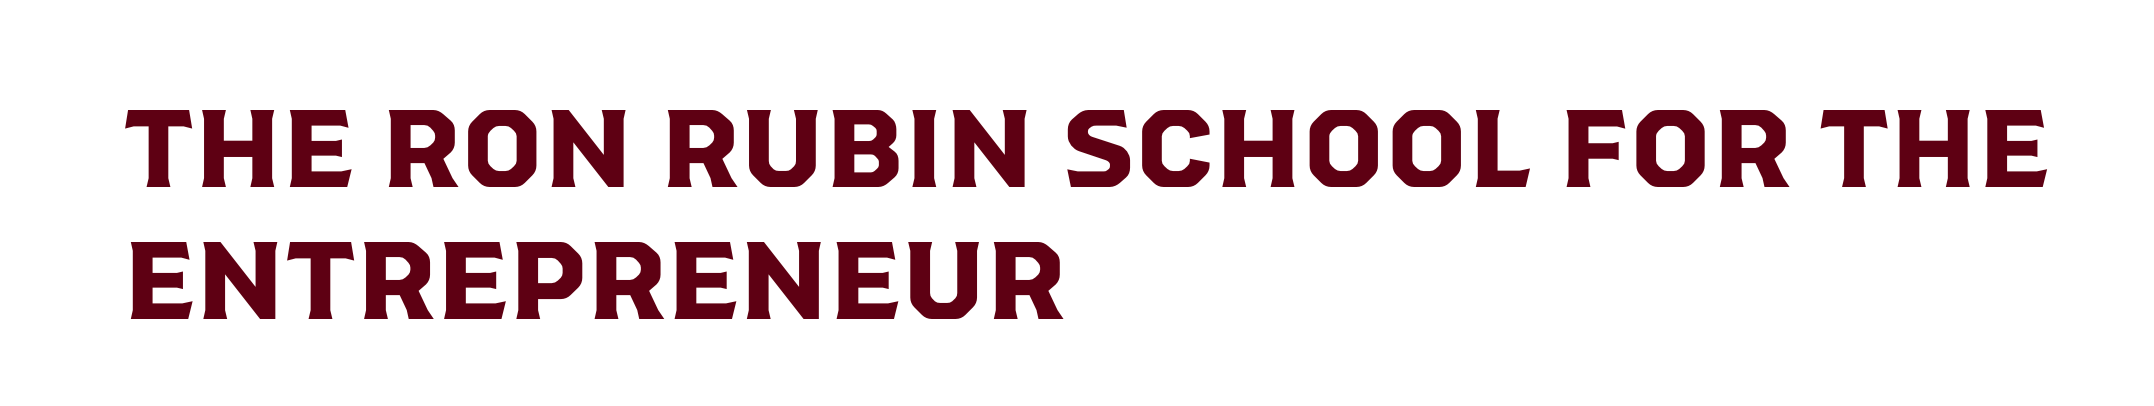 The_Ron_Rubin_School_for_the_Entrepreneur.png